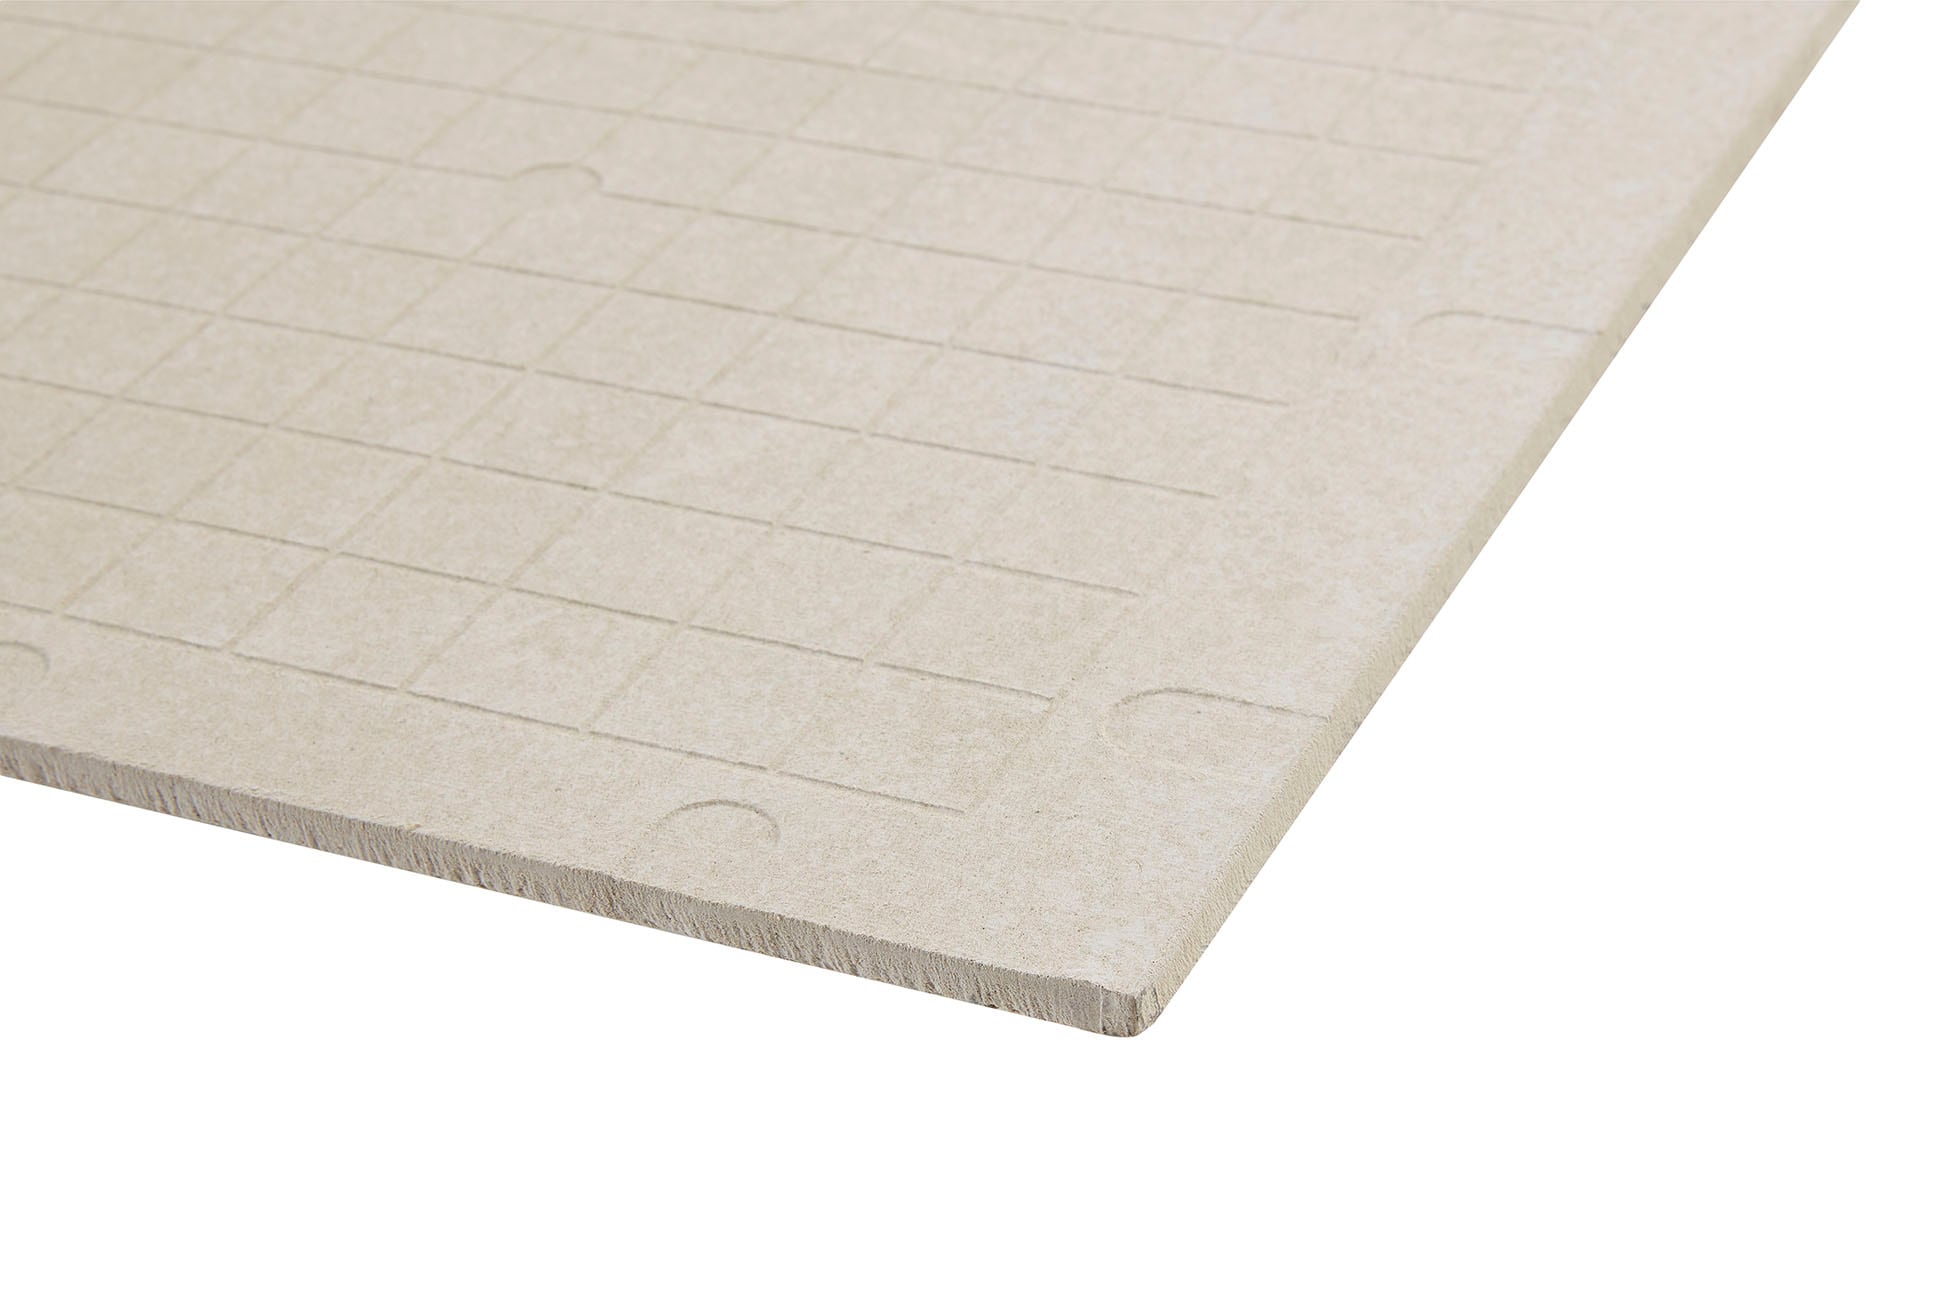 What is a Backing Board?